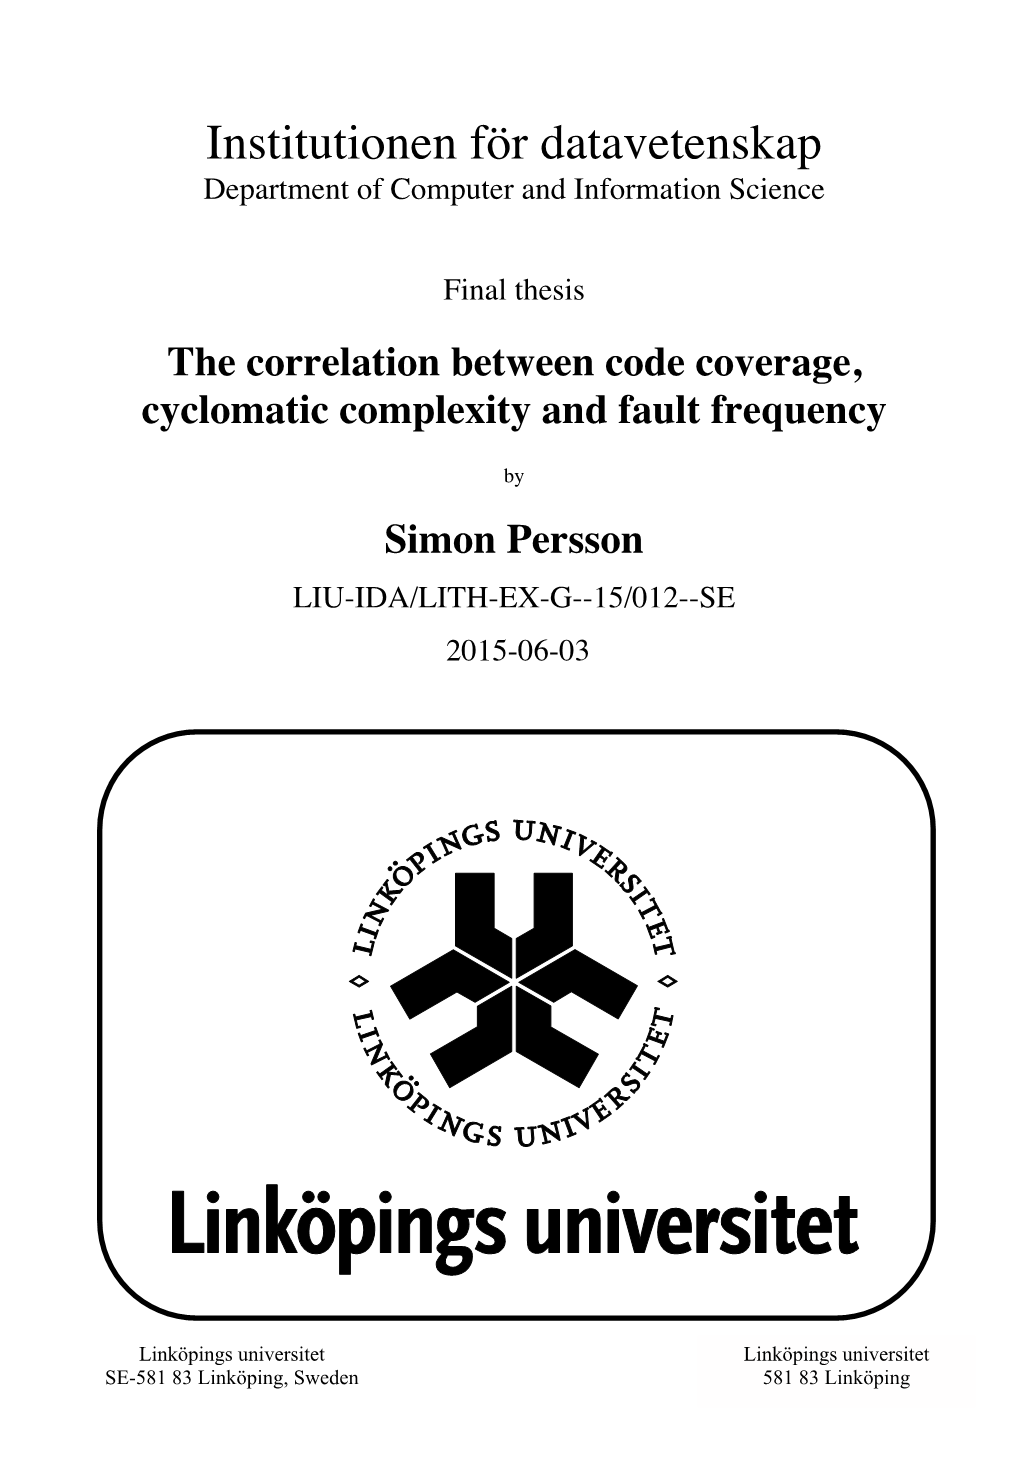 The Correlation Between Code Coverage, Cyclomatic Complexity and Fault Frequency